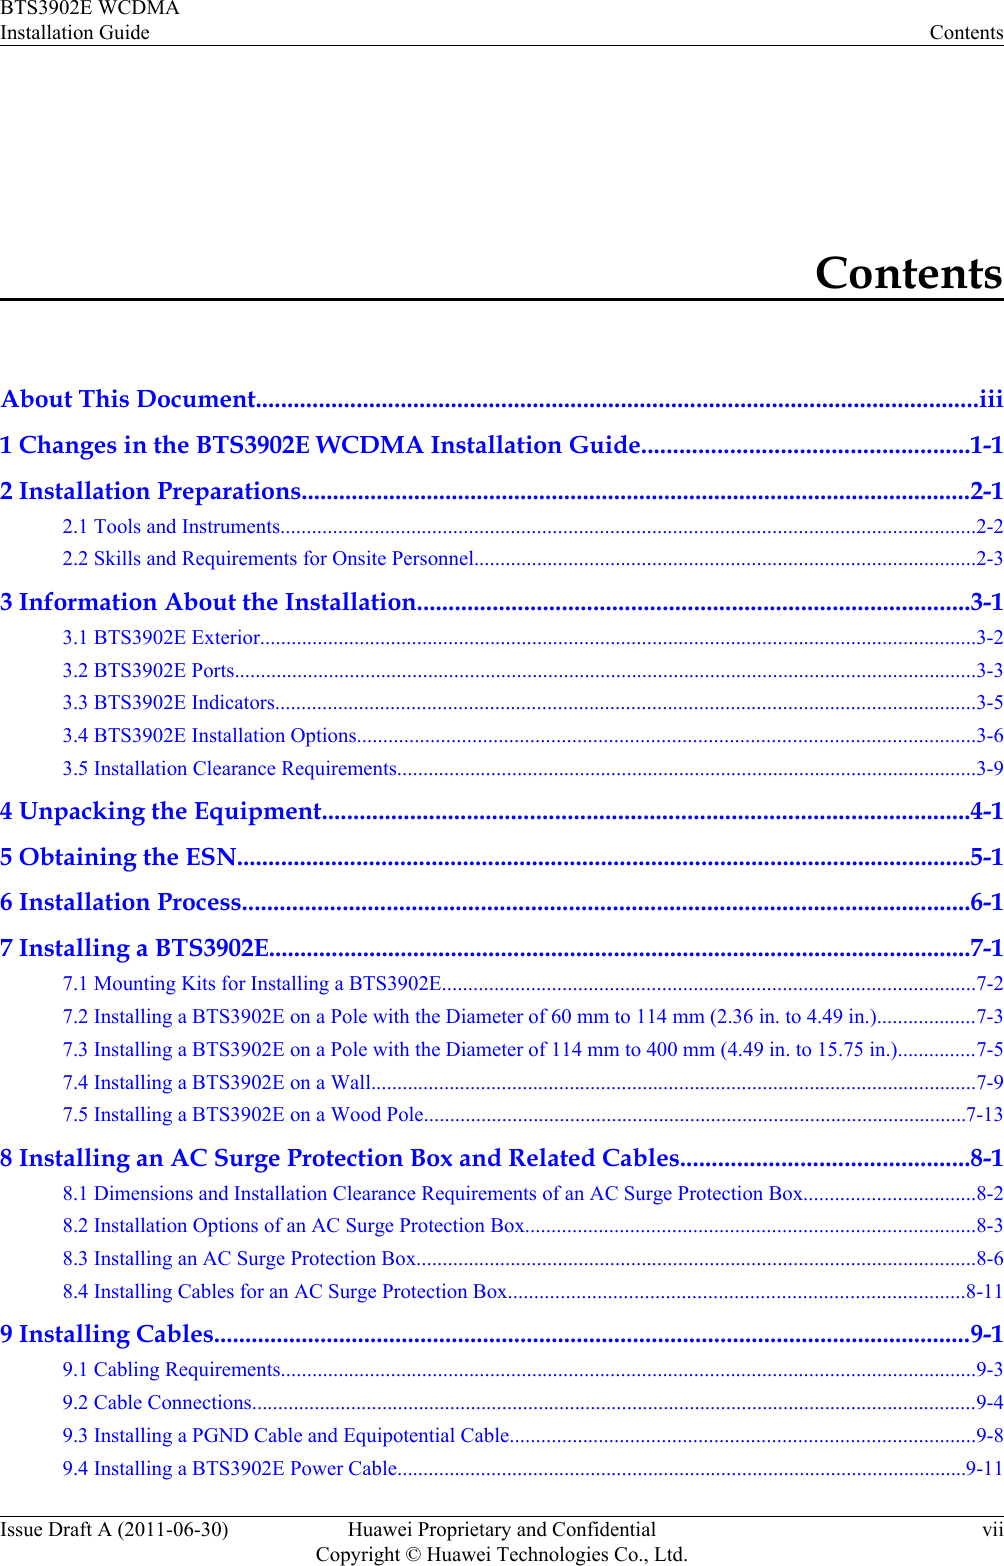 ContentsAbout This Document...................................................................................................................iii1 Changes in the BTS3902E WCDMA Installation Guide....................................................1-12 Installation Preparations...........................................................................................................2-12.1 Tools and Instruments.....................................................................................................................................2-22.2 Skills and Requirements for Onsite Personnel................................................................................................2-33 Information About the Installation........................................................................................3-13.1 BTS3902E Exterior.........................................................................................................................................3-23.2 BTS3902E Ports..............................................................................................................................................3-33.3 BTS3902E Indicators......................................................................................................................................3-53.4 BTS3902E Installation Options......................................................................................................................3-63.5 Installation Clearance Requirements...............................................................................................................3-94 Unpacking the Equipment.......................................................................................................4-15 Obtaining the ESN.....................................................................................................................5-16 Installation Process....................................................................................................................6-17 Installing a BTS3902E................................................................................................................7-17.1 Mounting Kits for Installing a BTS3902E......................................................................................................7-27.2 Installing a BTS3902E on a Pole with the Diameter of 60 mm to 114 mm (2.36 in. to 4.49 in.)...................7-37.3 Installing a BTS3902E on a Pole with the Diameter of 114 mm to 400 mm (4.49 in. to 15.75 in.)...............7-57.4 Installing a BTS3902E on a Wall....................................................................................................................7-97.5 Installing a BTS3902E on a Wood Pole........................................................................................................7-138 Installing an AC Surge Protection Box and Related Cables..............................................8-18.1 Dimensions and Installation Clearance Requirements of an AC Surge Protection Box.................................8-28.2 Installation Options of an AC Surge Protection Box......................................................................................8-38.3 Installing an AC Surge Protection Box...........................................................................................................8-68.4 Installing Cables for an AC Surge Protection Box.......................................................................................8-119 Installing Cables.........................................................................................................................9-19.1 Cabling Requirements.....................................................................................................................................9-39.2 Cable Connections...........................................................................................................................................9-49.3 Installing a PGND Cable and Equipotential Cable.........................................................................................9-89.4 Installing a BTS3902E Power Cable.............................................................................................................9-11BTS3902E WCDMAInstallation Guide ContentsIssue Draft A (2011-06-30) Huawei Proprietary and ConfidentialCopyright © Huawei Technologies Co., Ltd.vii